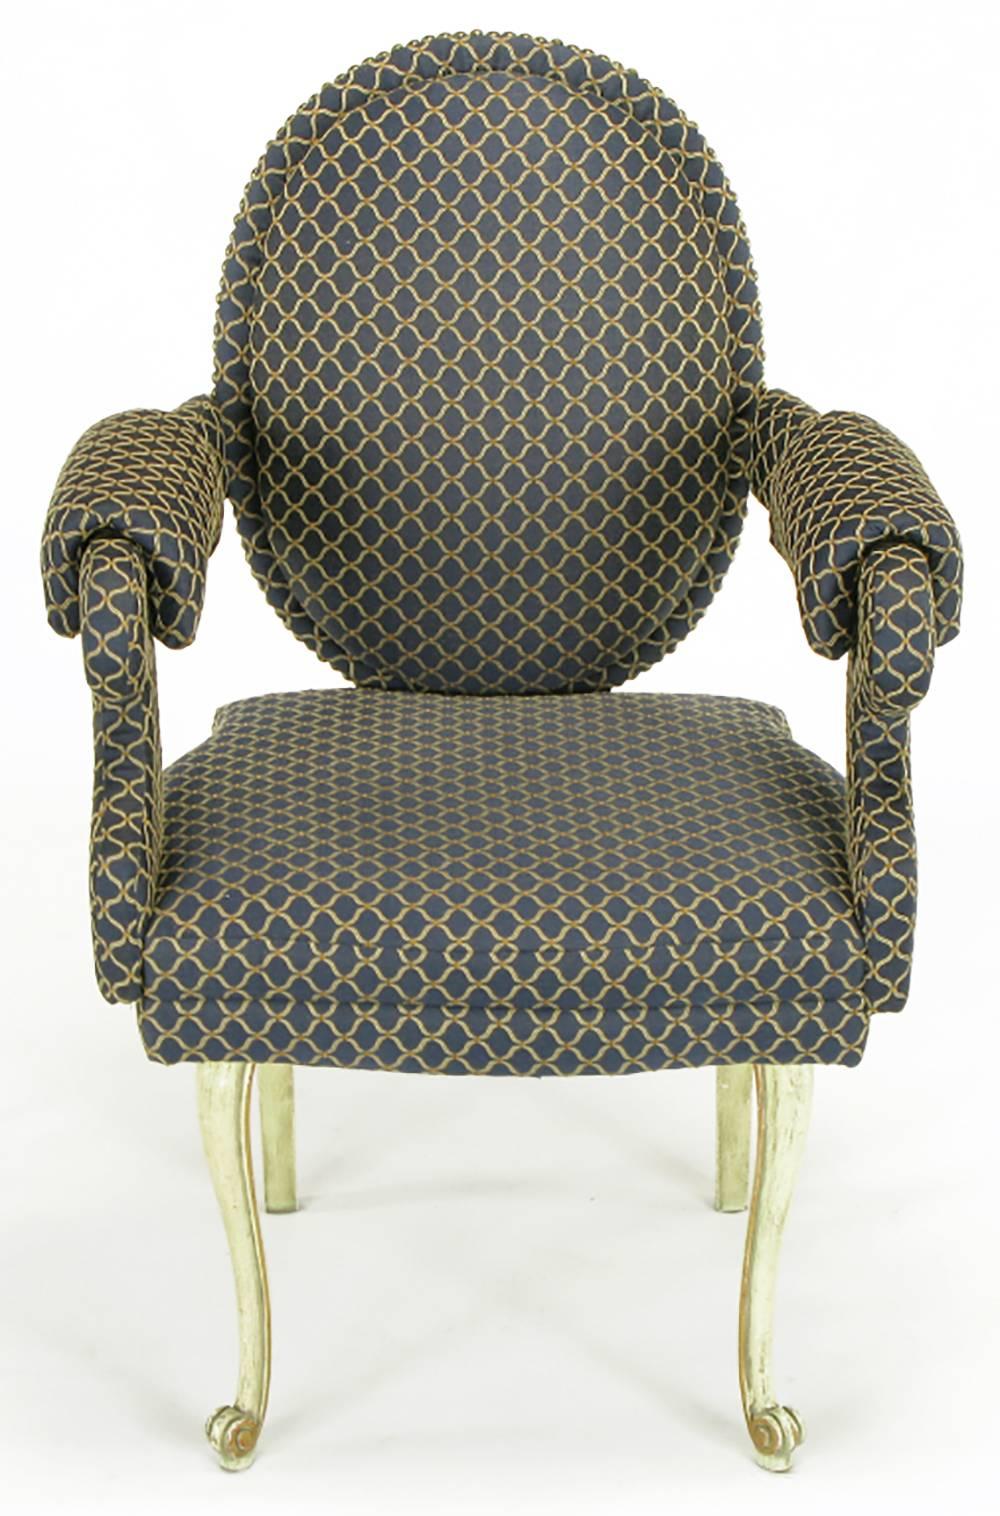 Unusual in being a mix of Louis XV and Louis XVI elements, as well as the distinctive upholstery treatment, these chairs have incredible lines. Everything above the legs is upholstered in a royal blue and cream fabric, including the arms and the